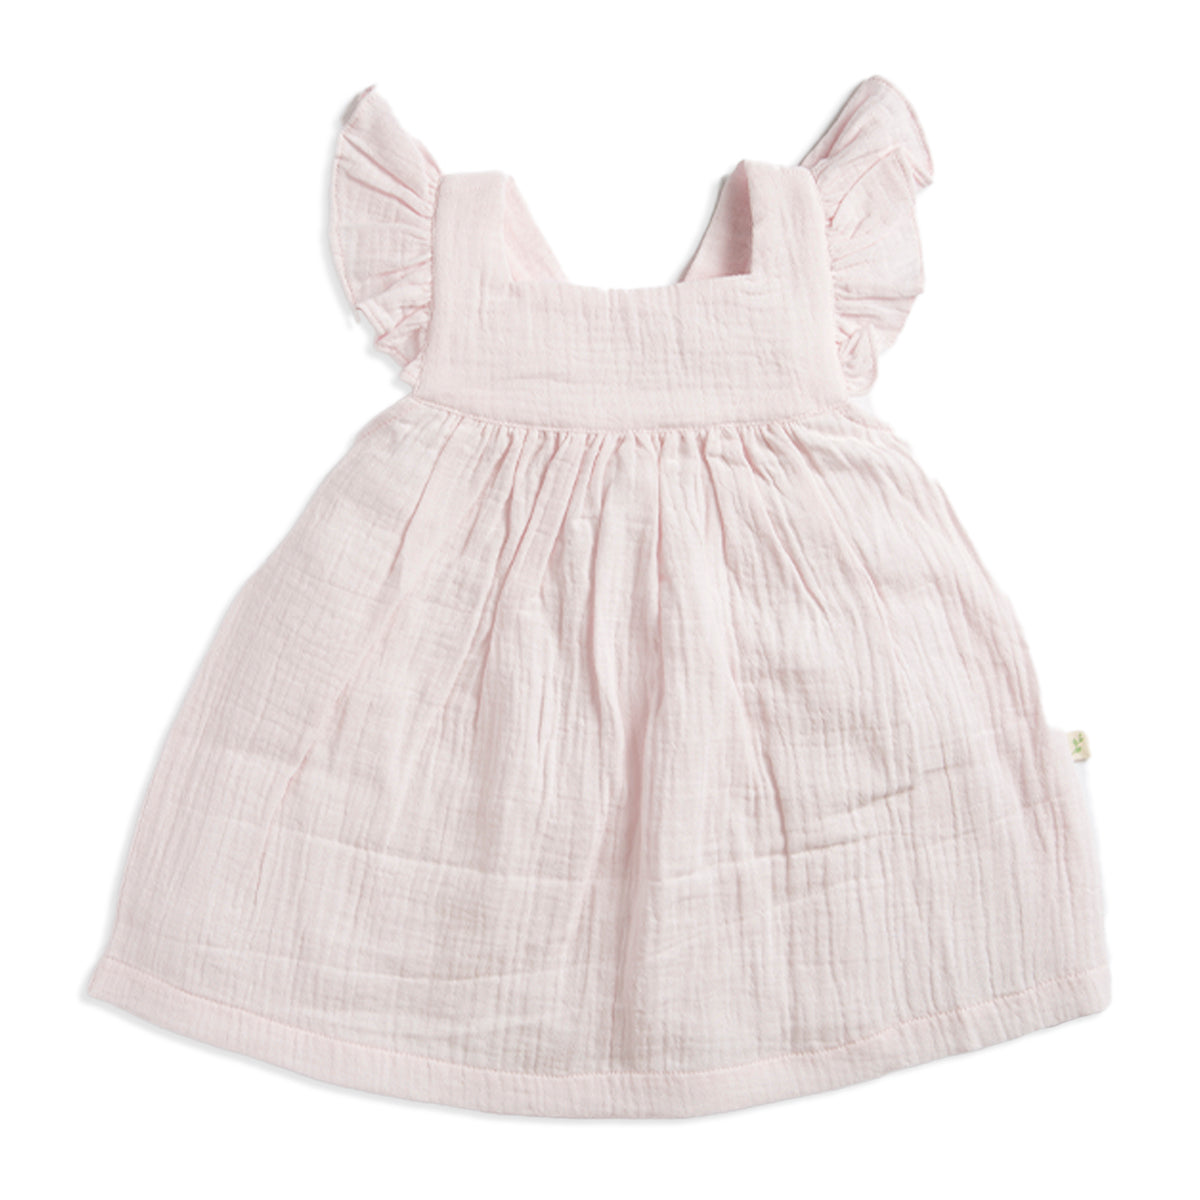 Tiny Twig Angel Dress & Bloomer-Soft Pink Crinkle (Organic Cotton) - Tiny Tots Baby Store 